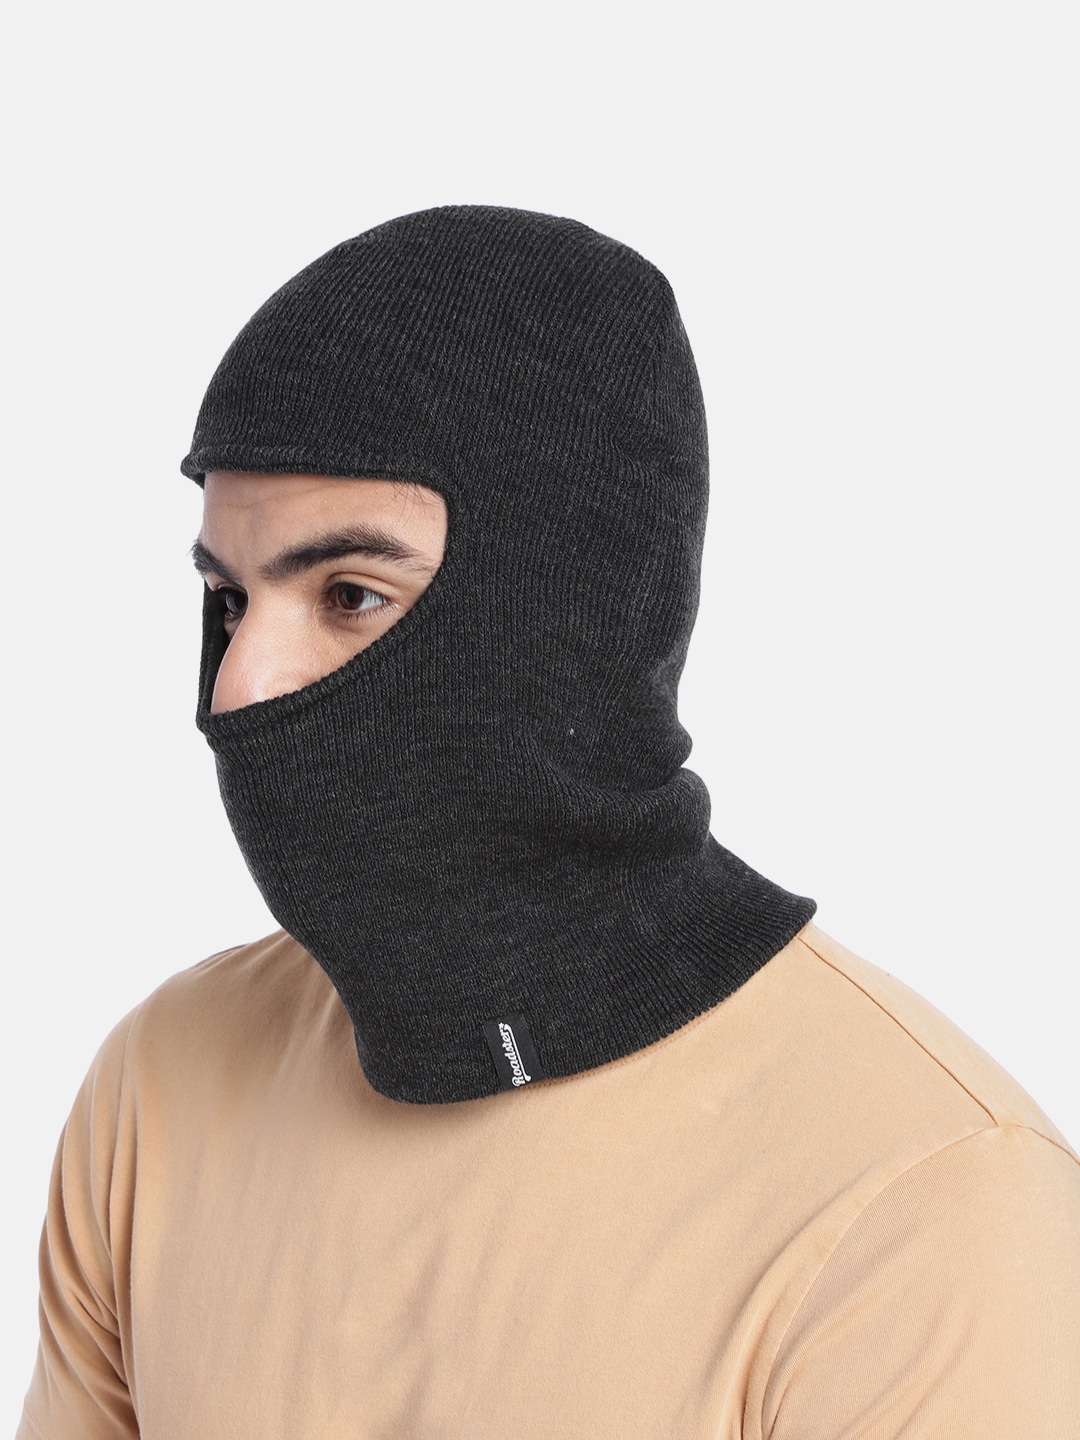 Roadster Unisex Black Solid Balaclava Price in India